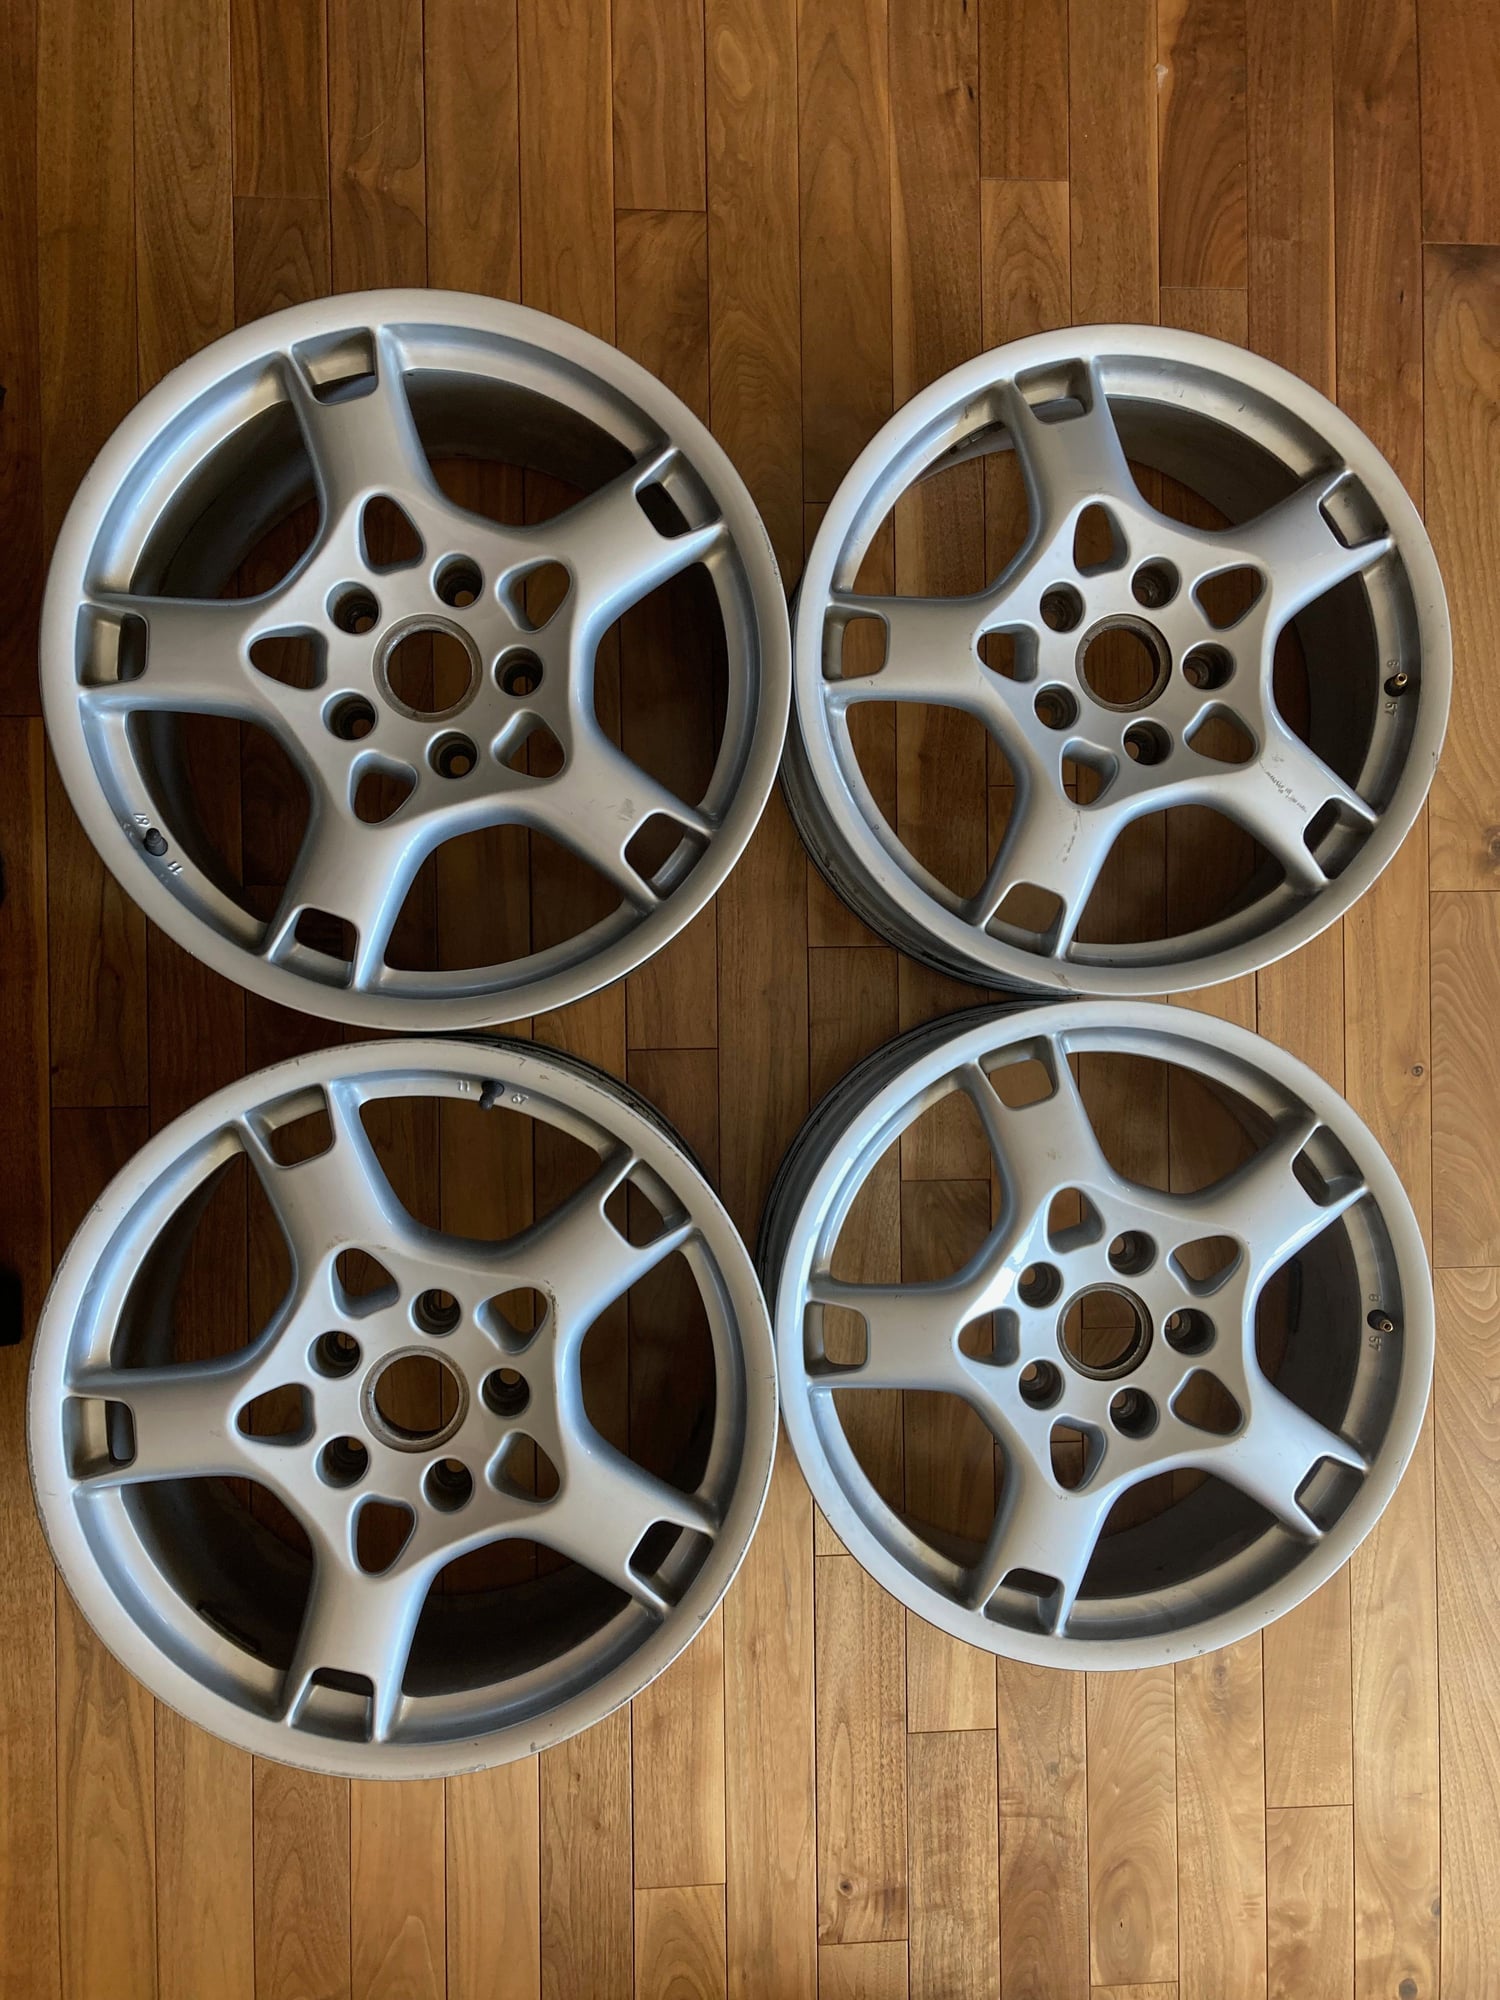 Wheels and Tires/Axles - Porsche Rims - Used - 0  All Models - Calgary, AB T3H5Z1, Canada